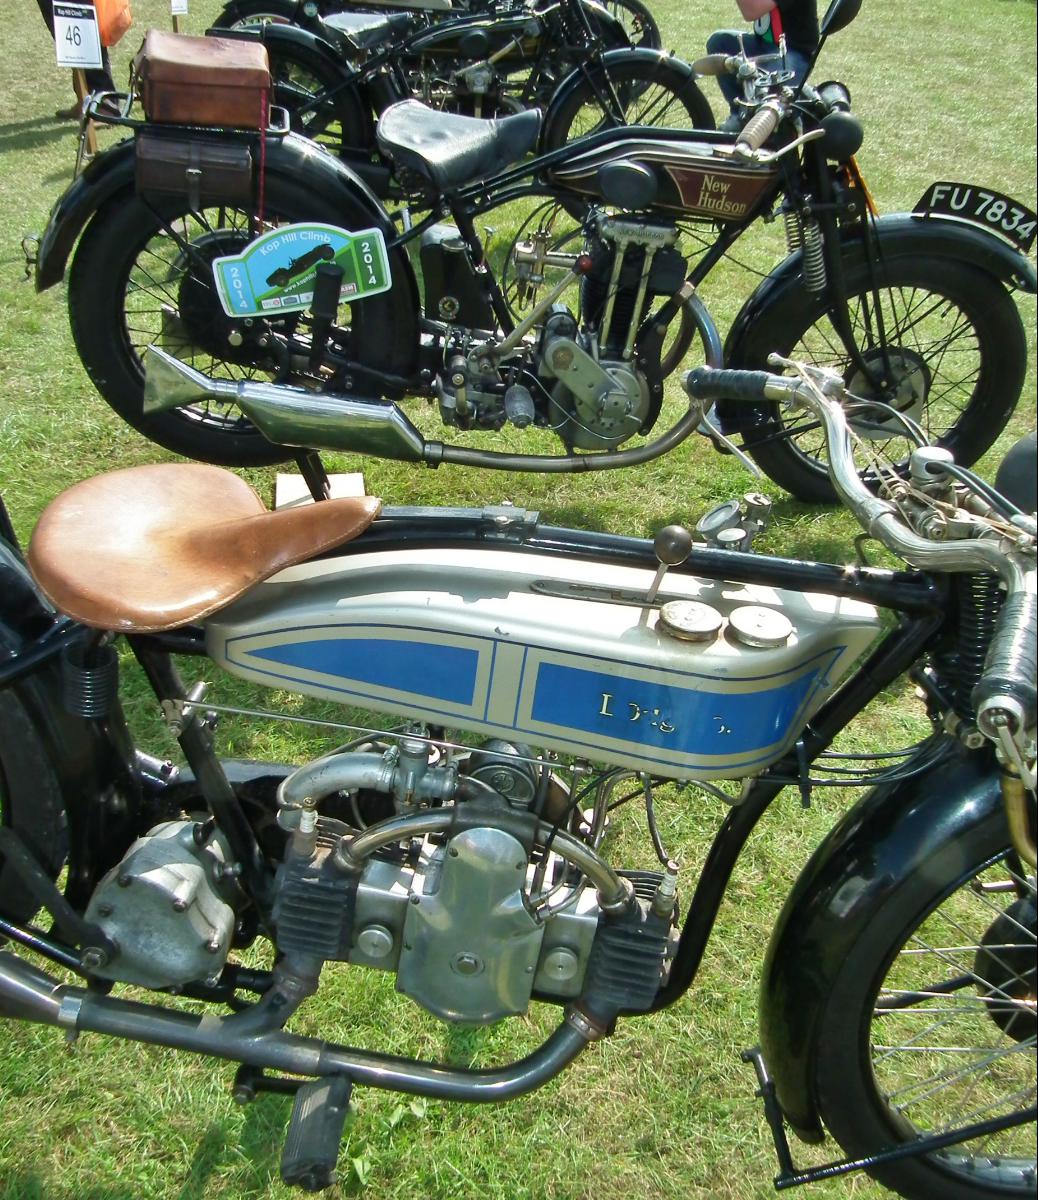 an antique motorcycle with several wooden seats parked in the grass